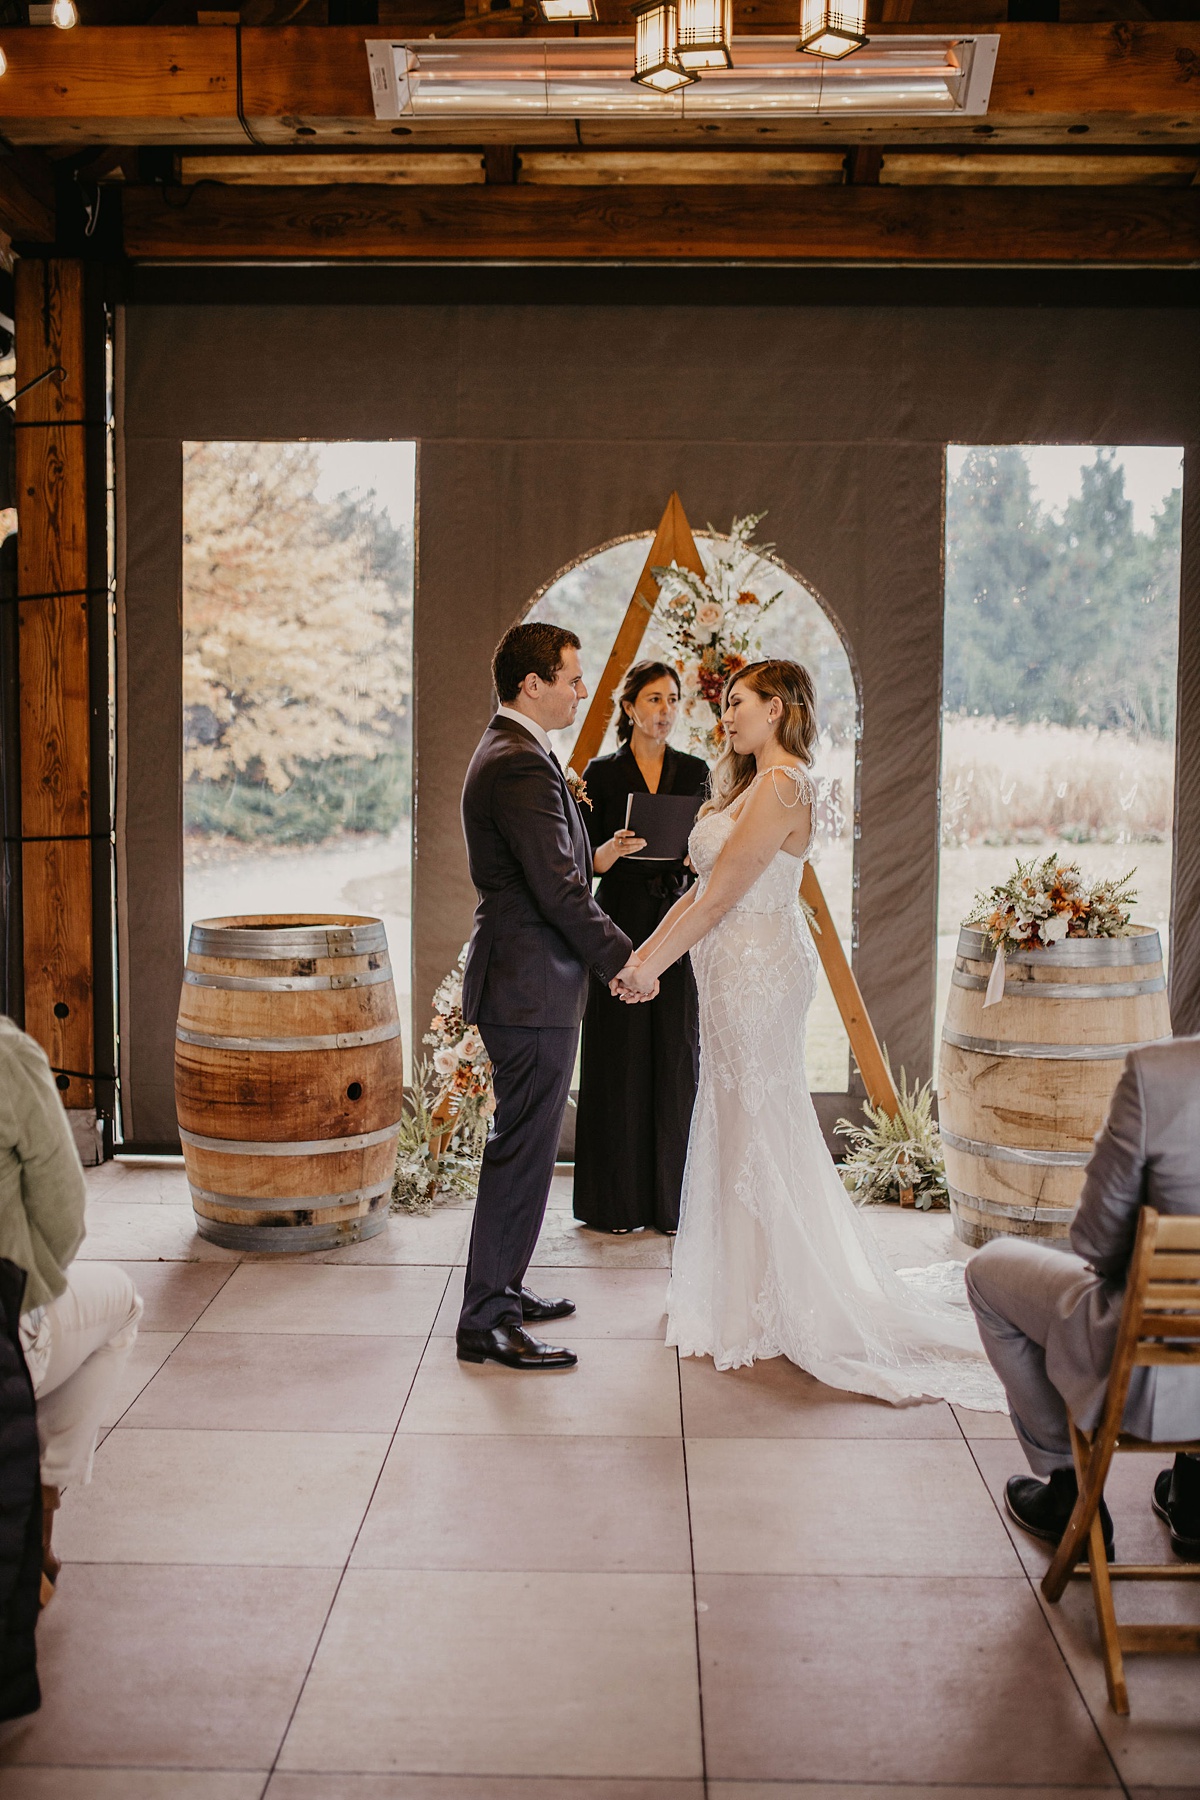 the couple holding hands in front of their ceremony florals in the tented gazebo